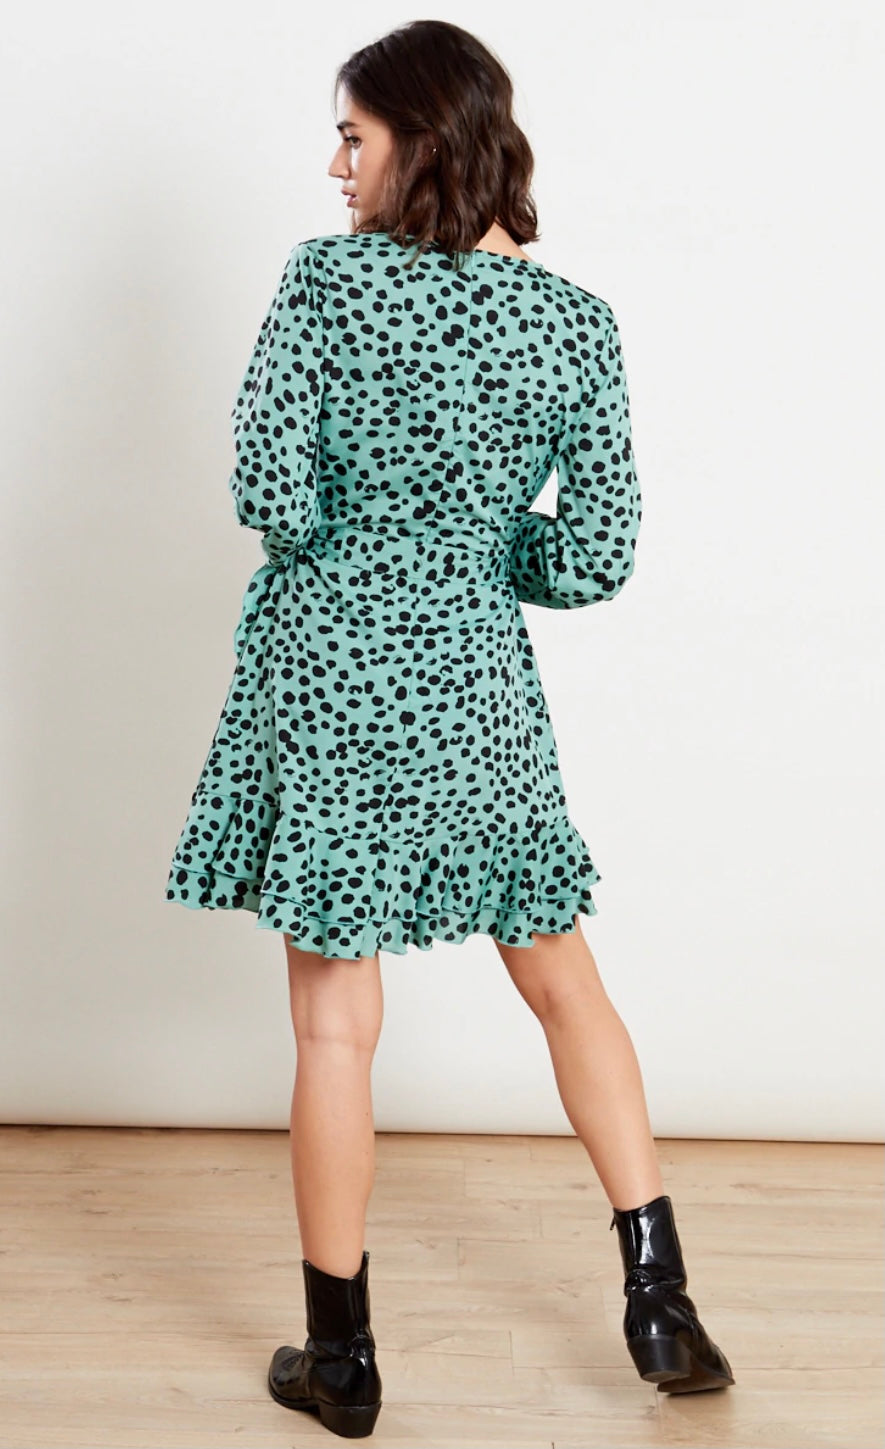 Dark mint green animal printed dress with wrap top, frill skirt and self fabric belt